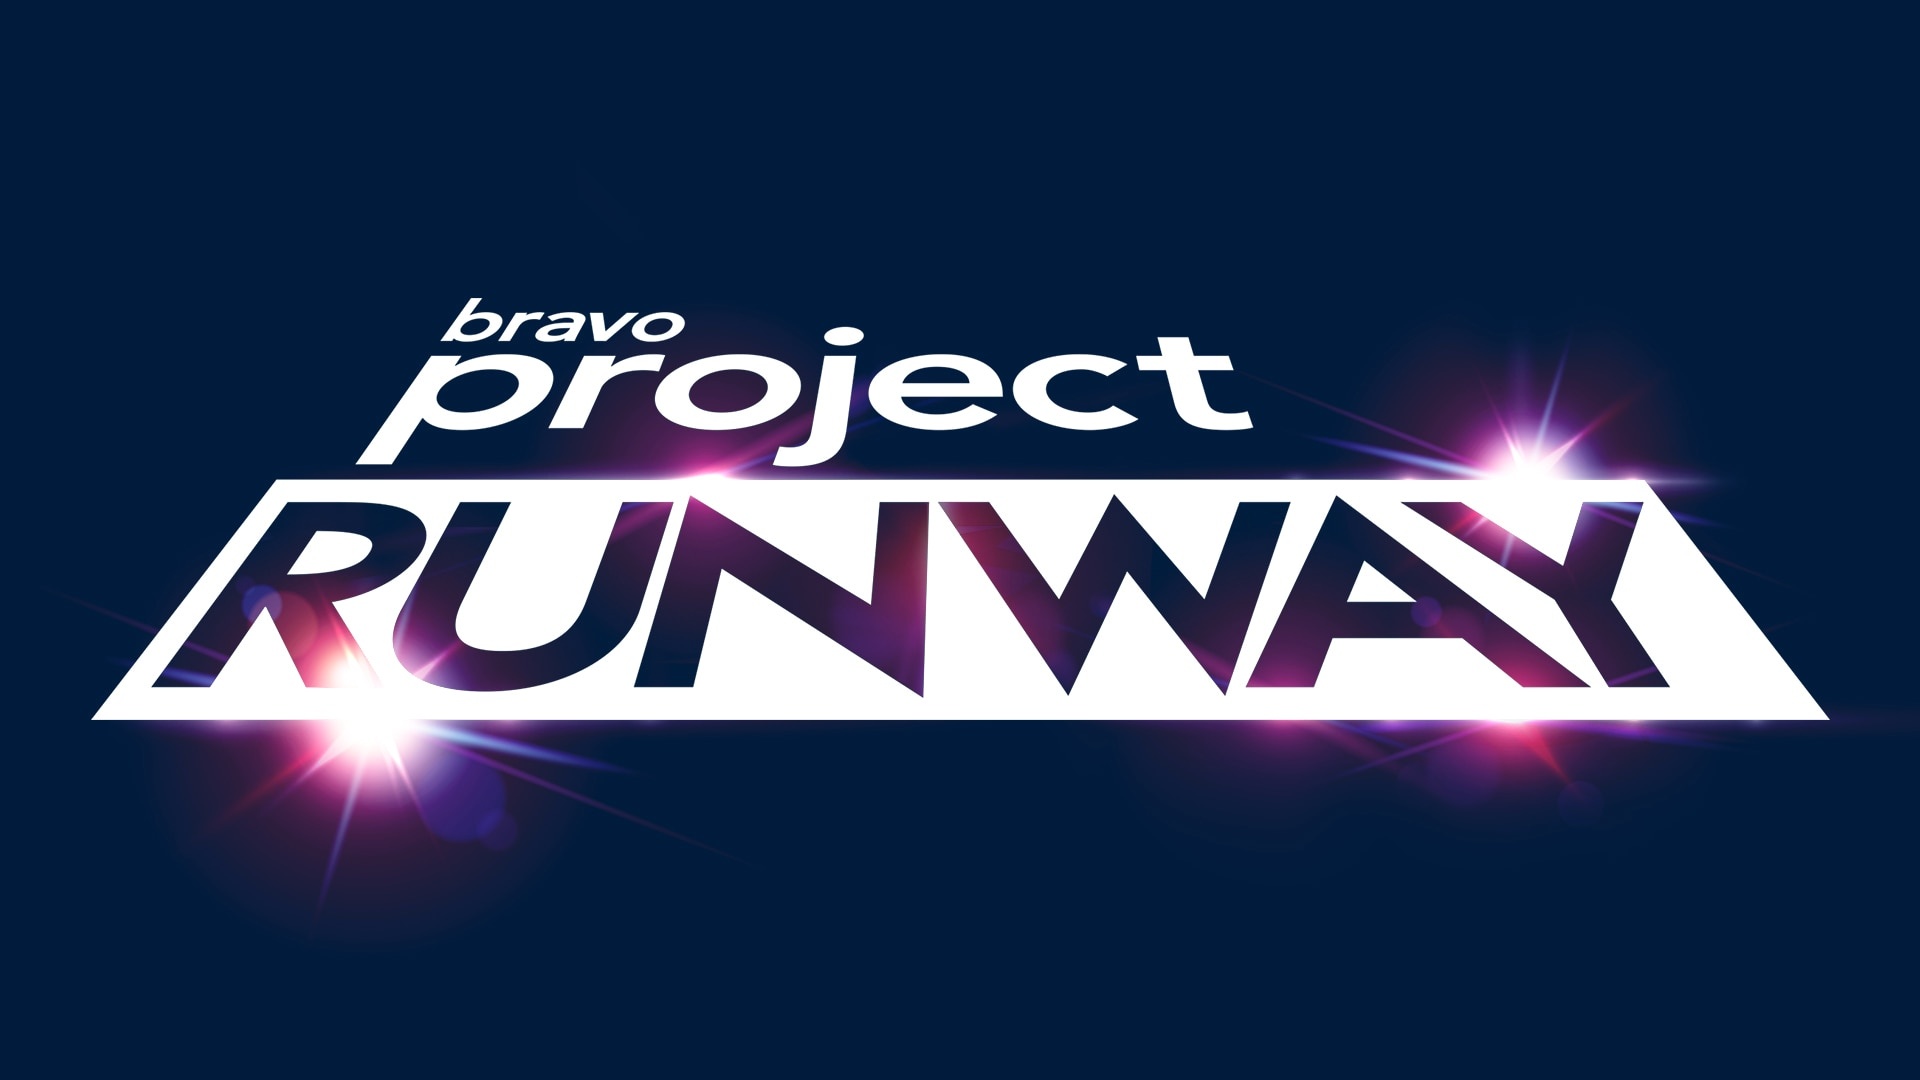 Project Runway, Fashion competition, TV show, 1920x1080 Full HD Desktop